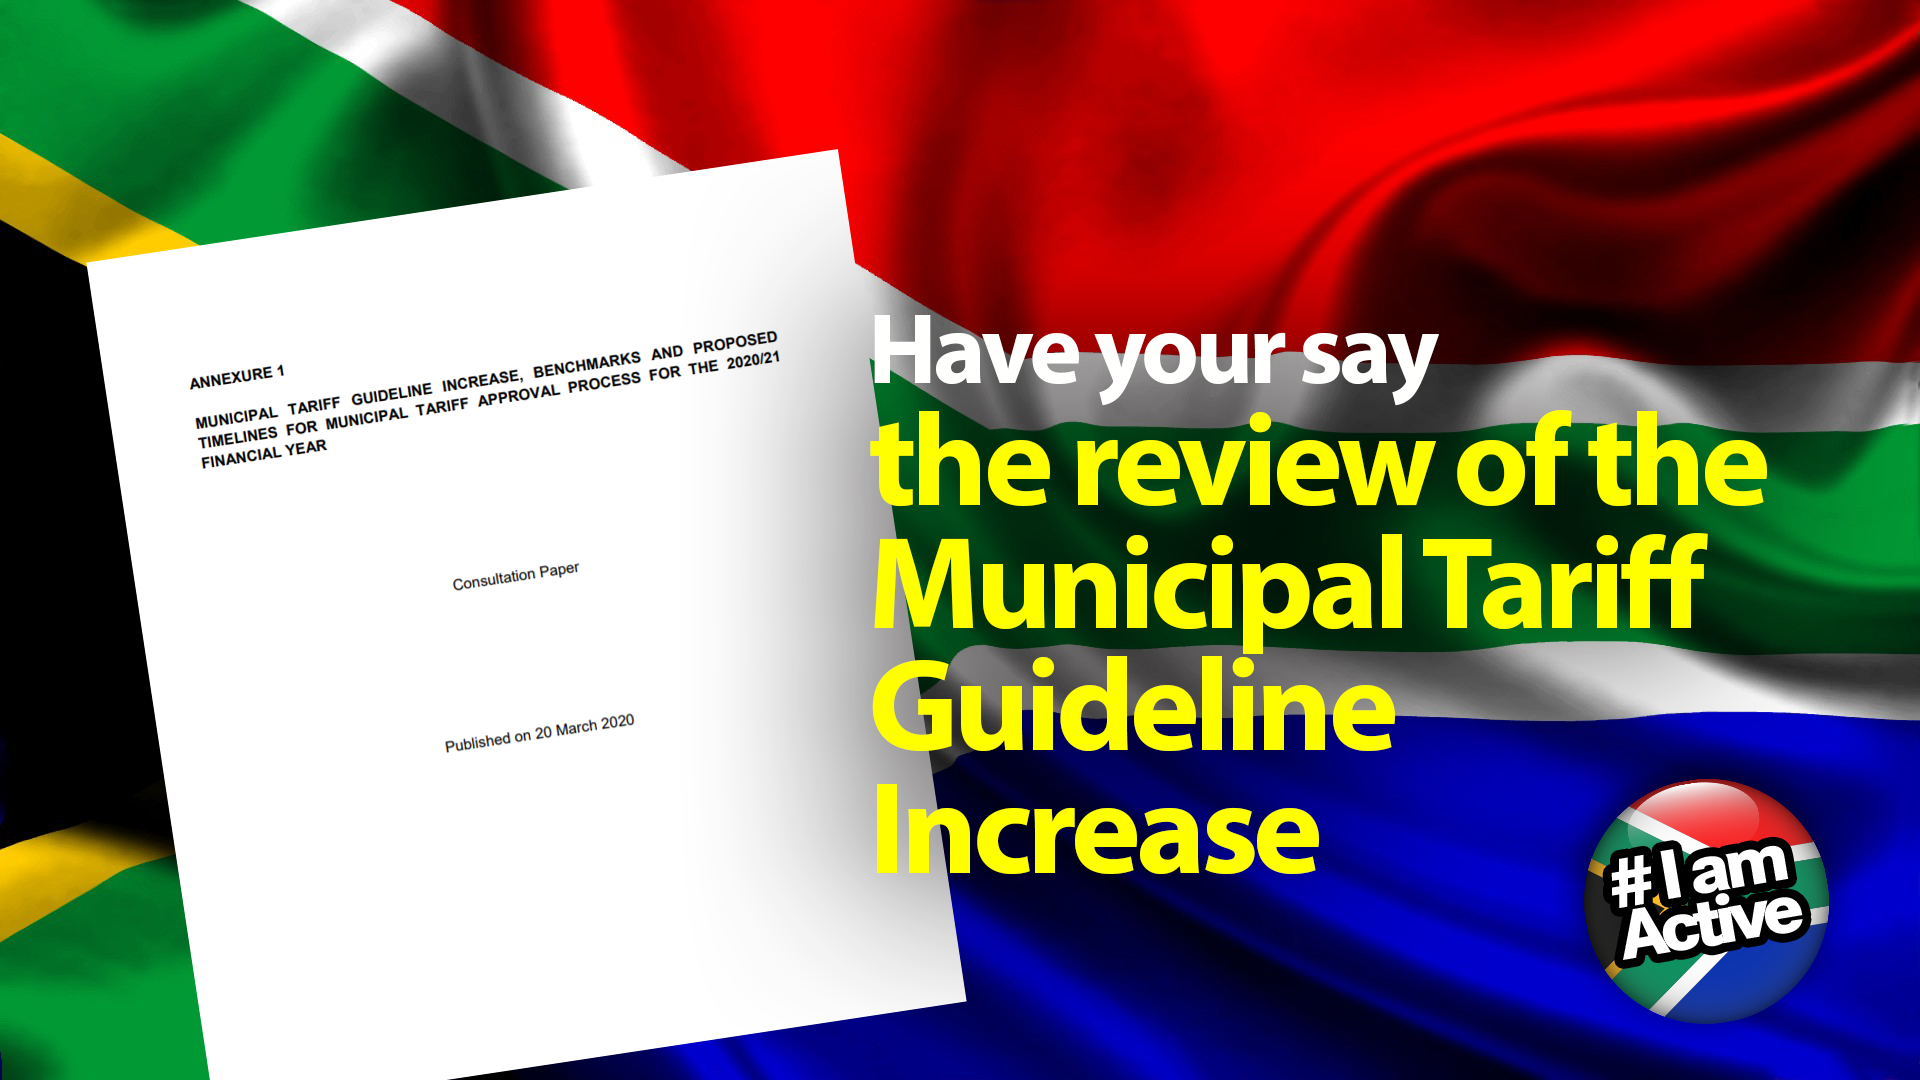 THE REVIEW OF THE MUNICIPAL TARIFF GUIDELINE INCREASE, BENCHMARKS AND